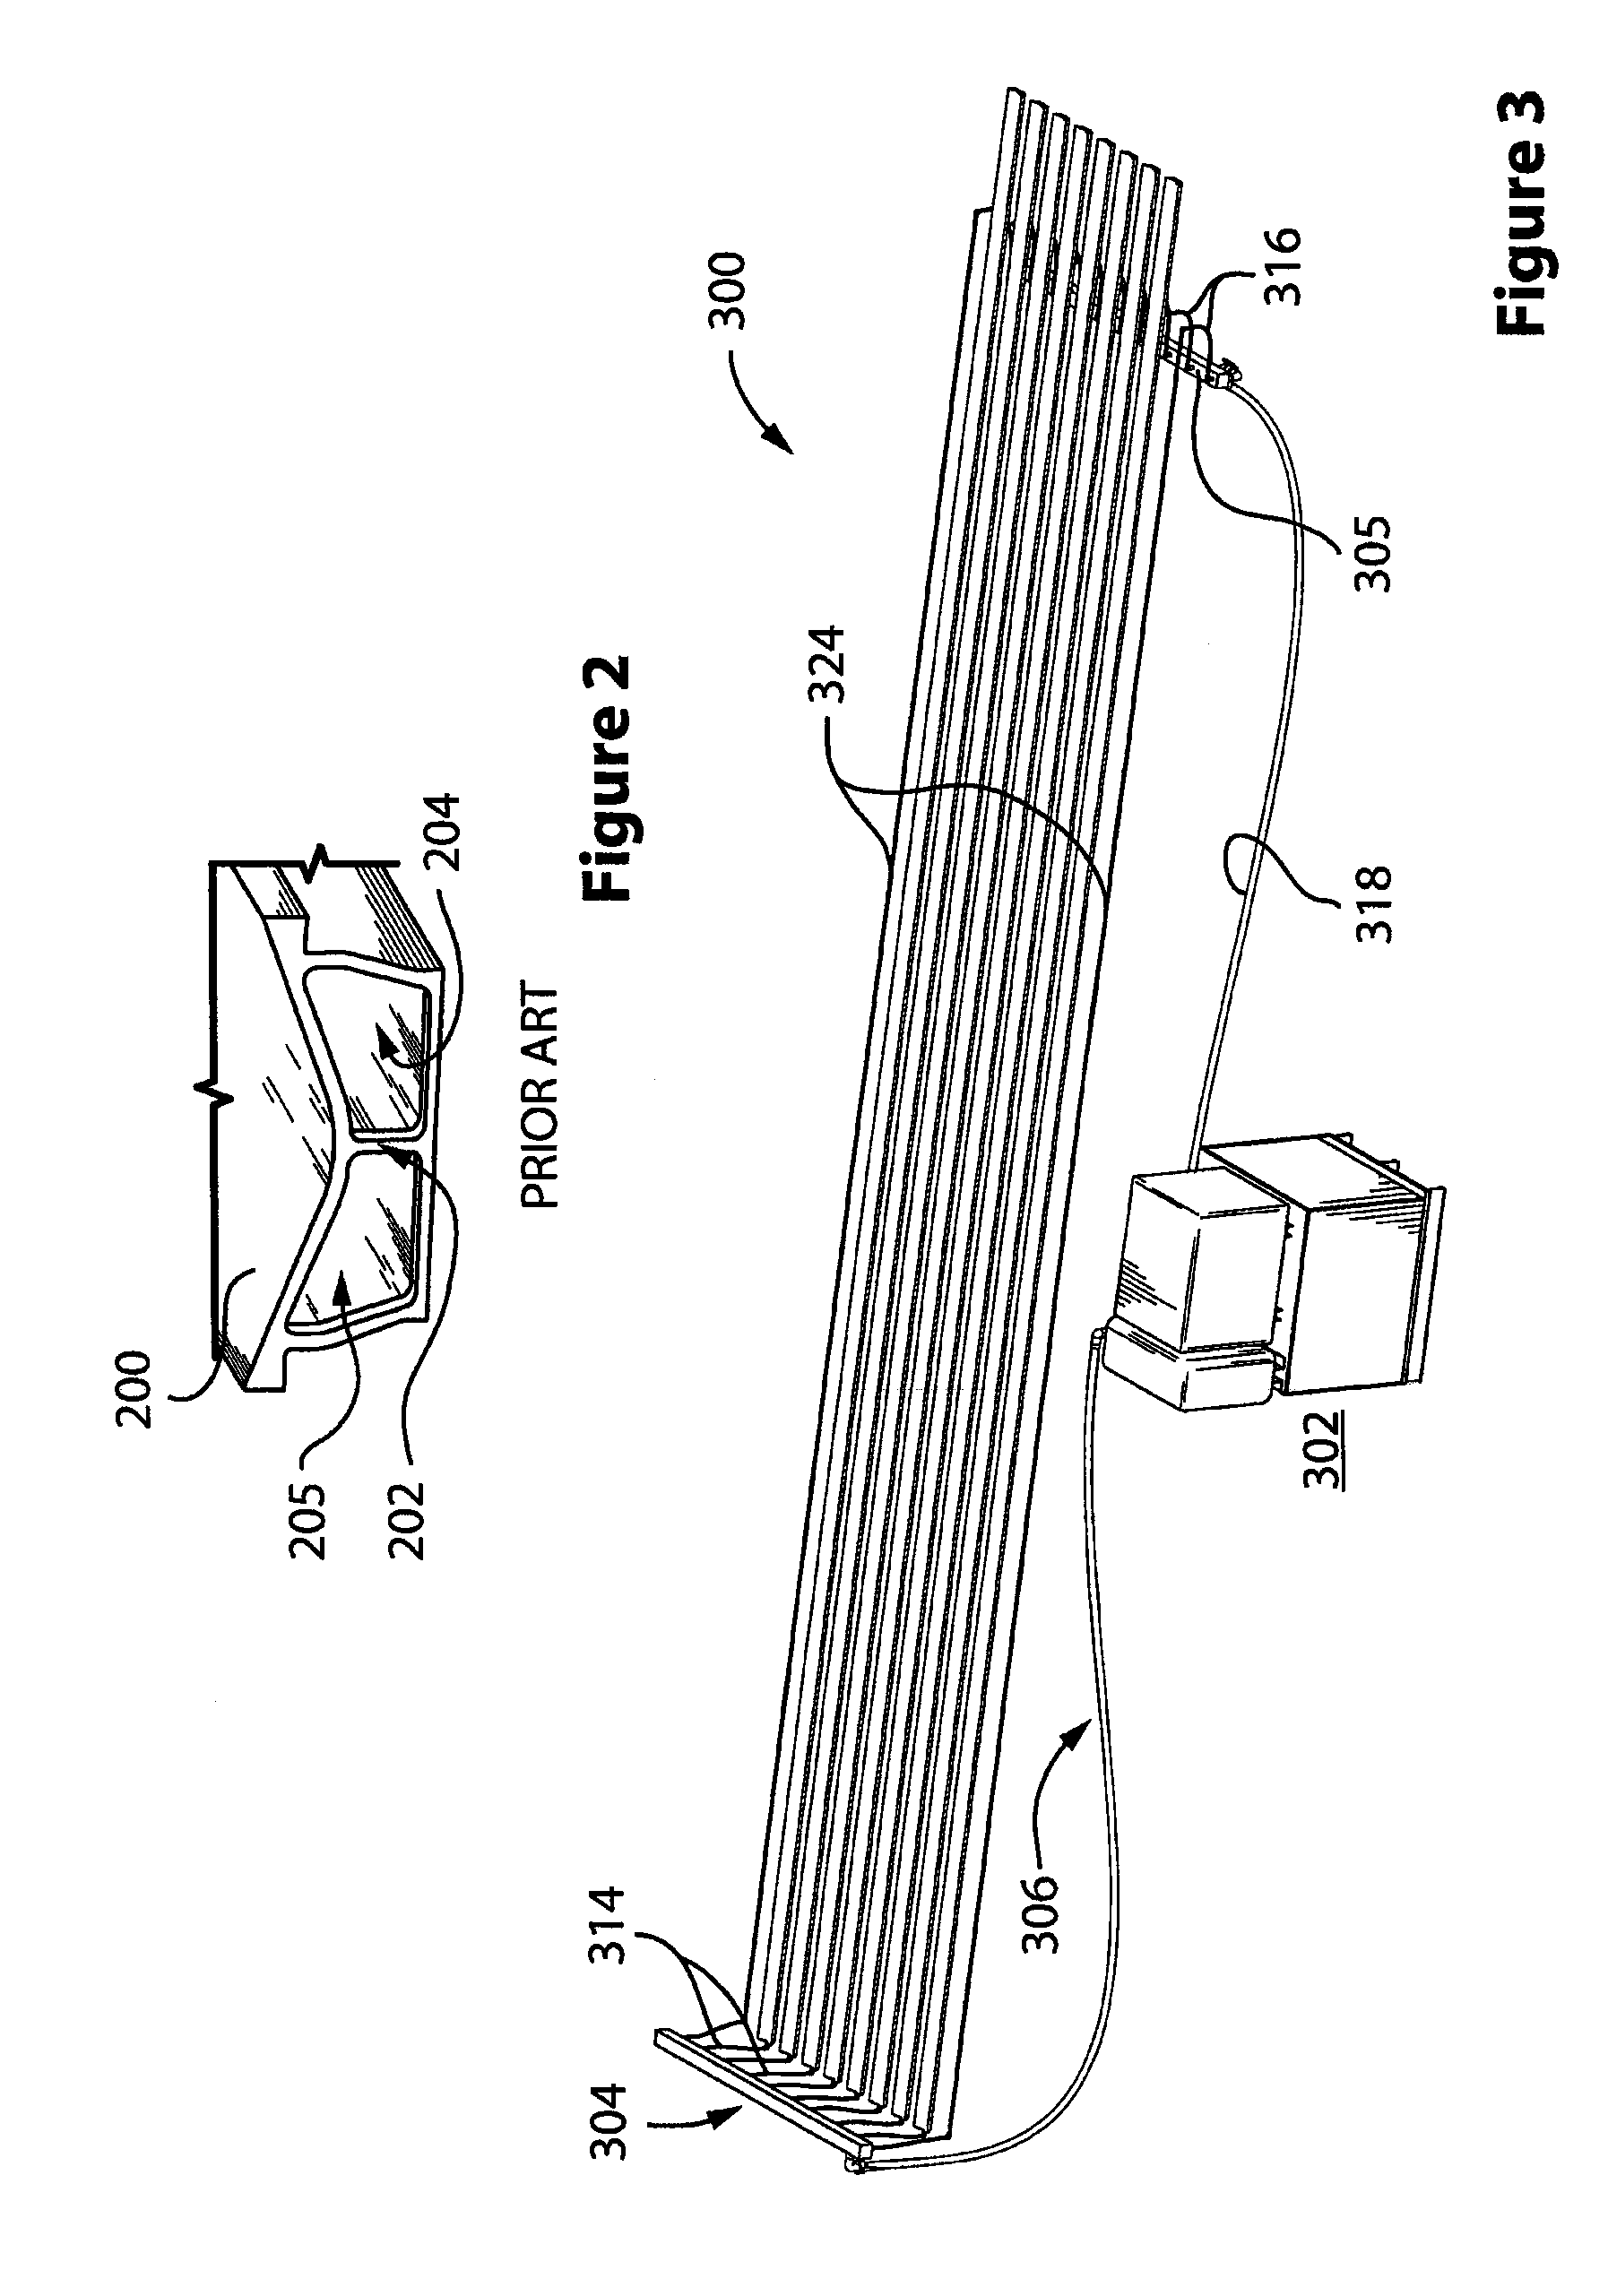 Apparatus and method for warming the floor of a trailer